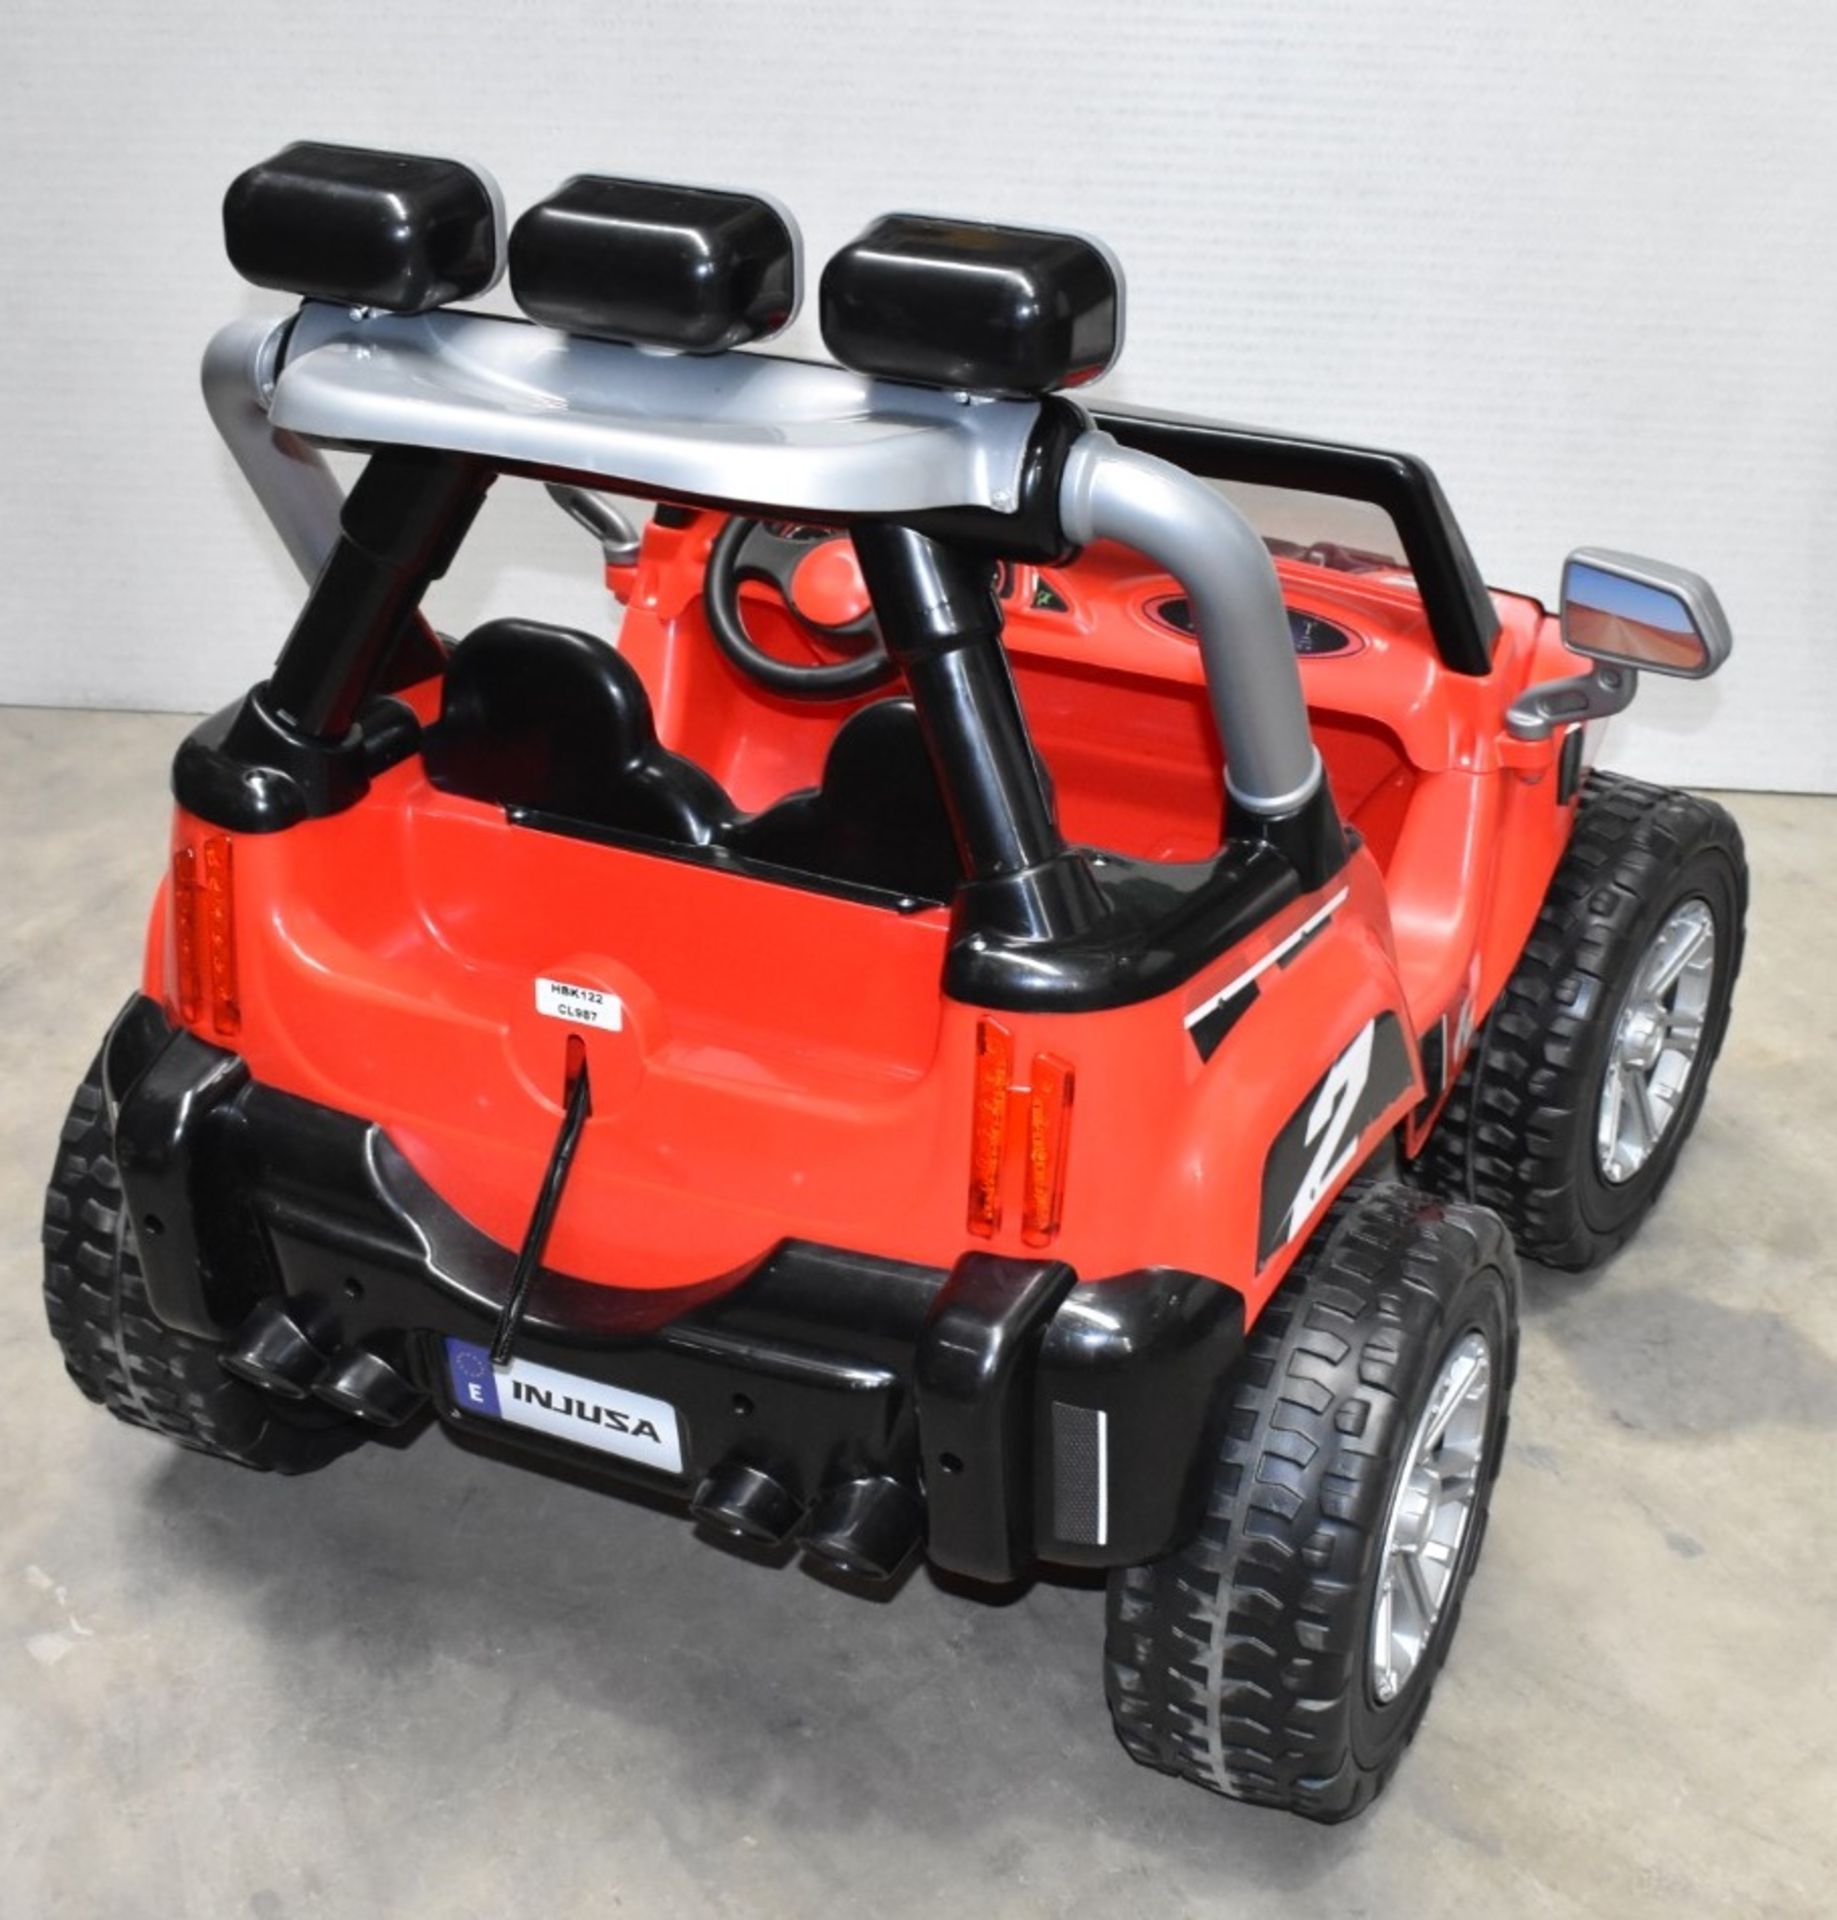 1 x INJUSA 'Monster' Child's 24v Ride-On Toy Car - UK Exclusive Model - Original RRP £450.00 - Image 12 of 13